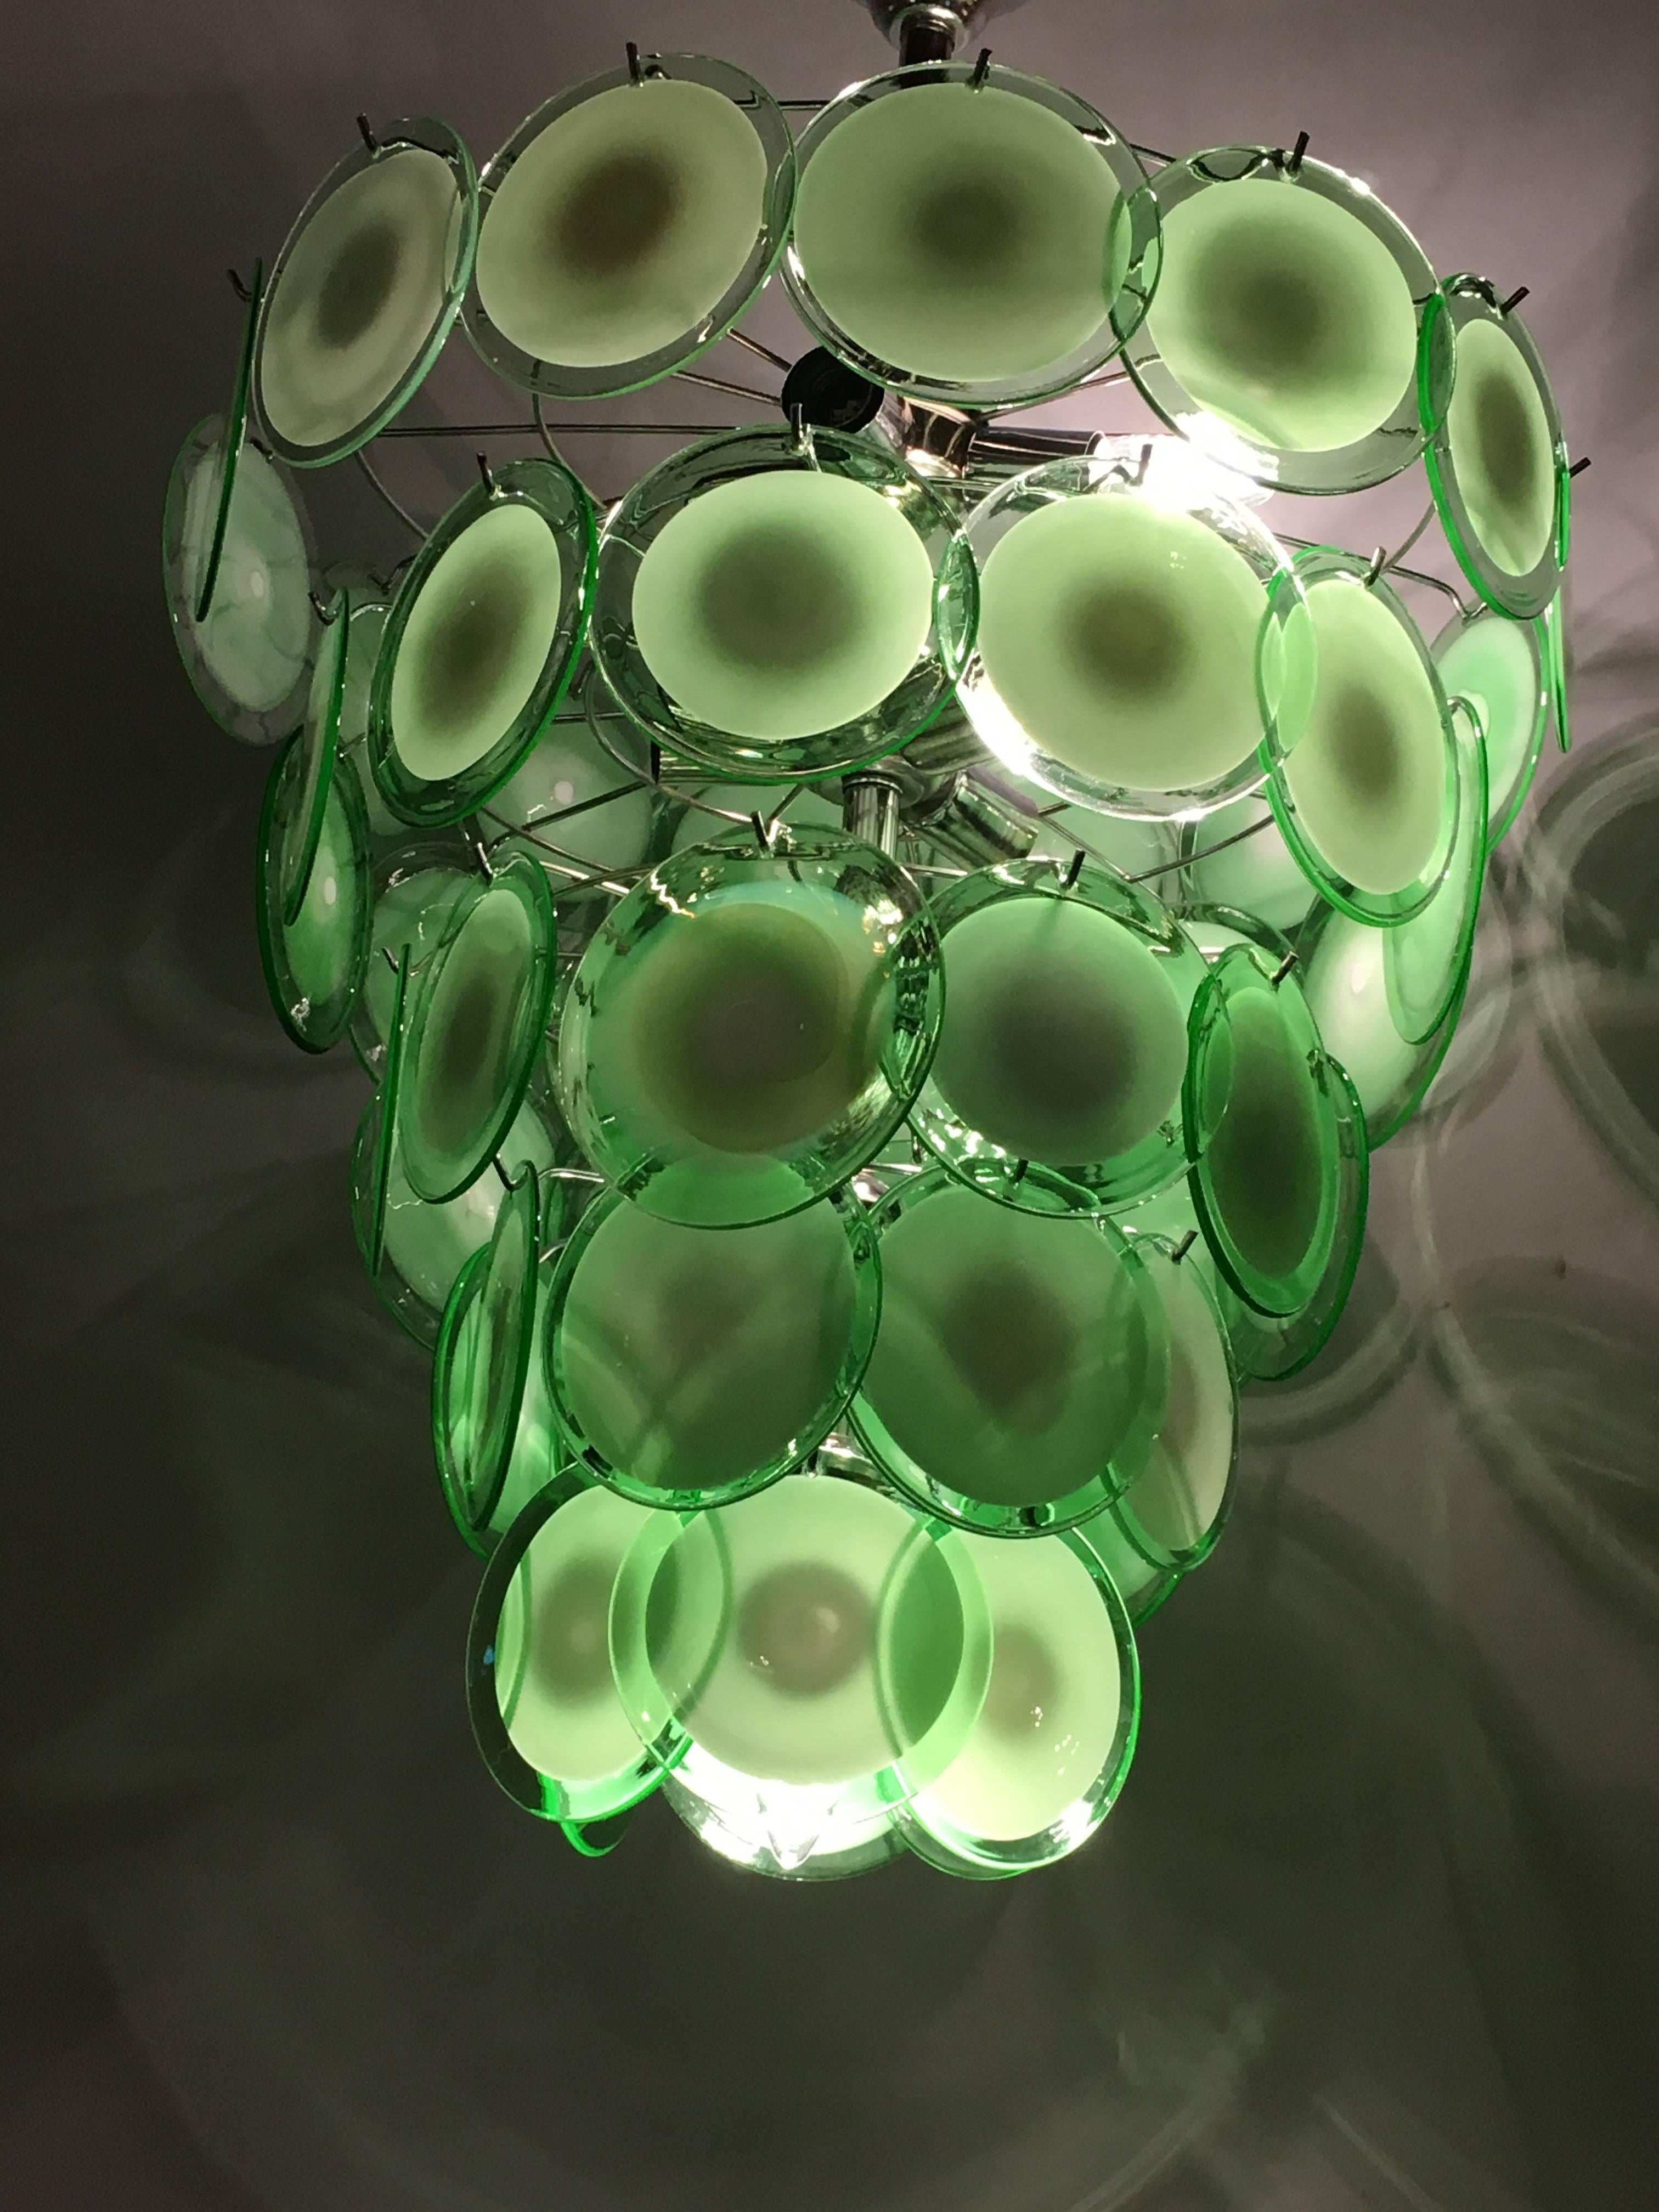 A pair of Vistosi style circular glass sphere chandeliers. Each having fifty circular glass spheres approximately six inches in diameter. This pair having mint green and white glass disks. We have several colors and styles to choose from including